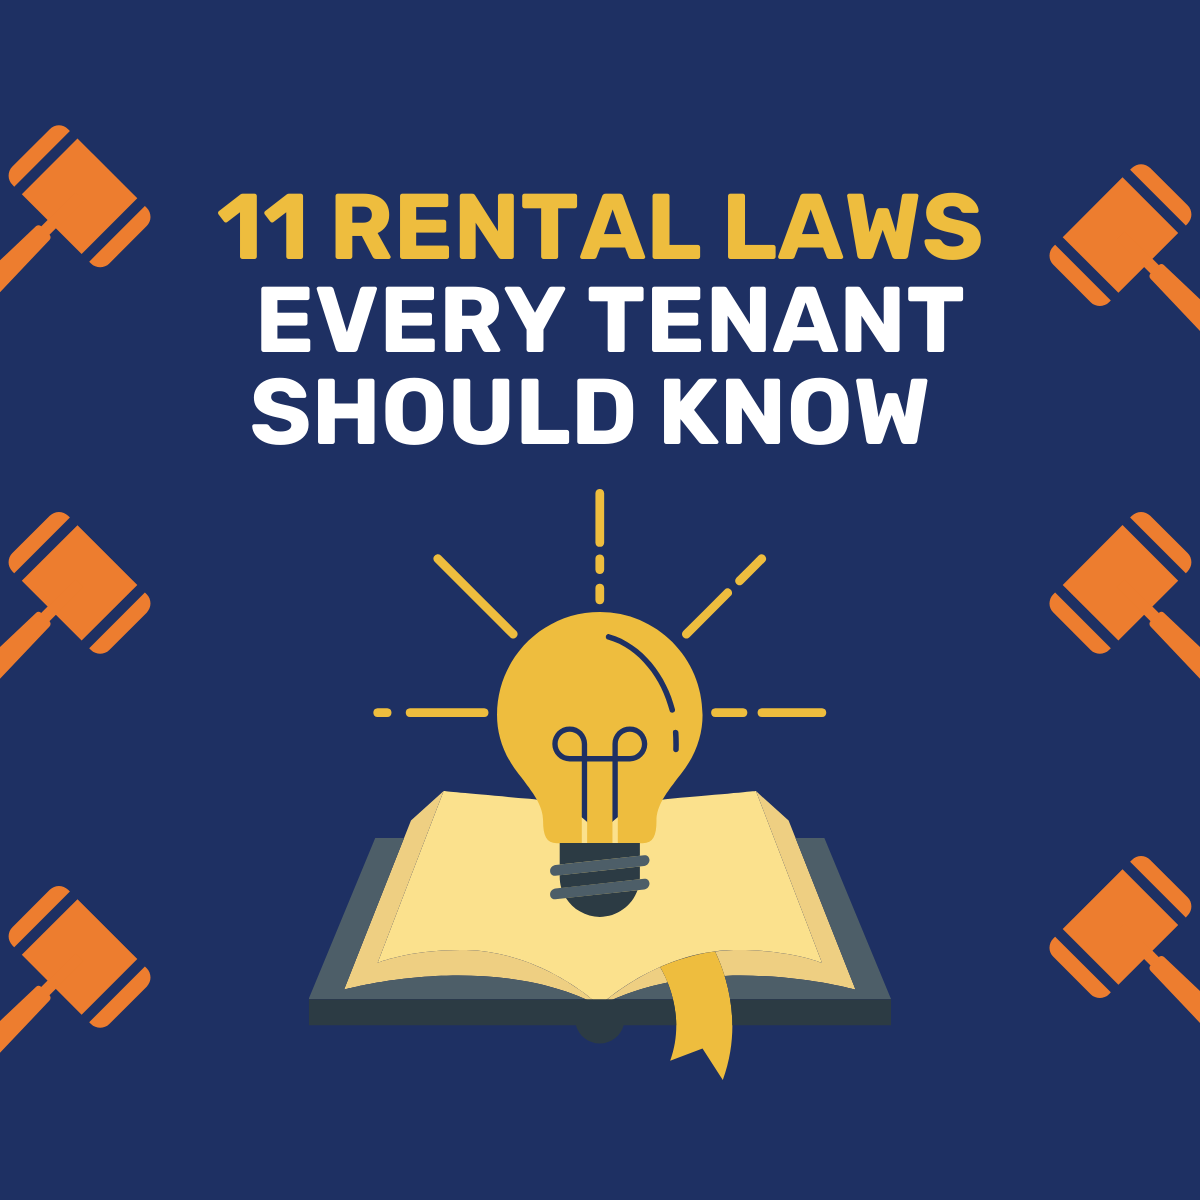 11 Rental Laws Every Tenant Should Know